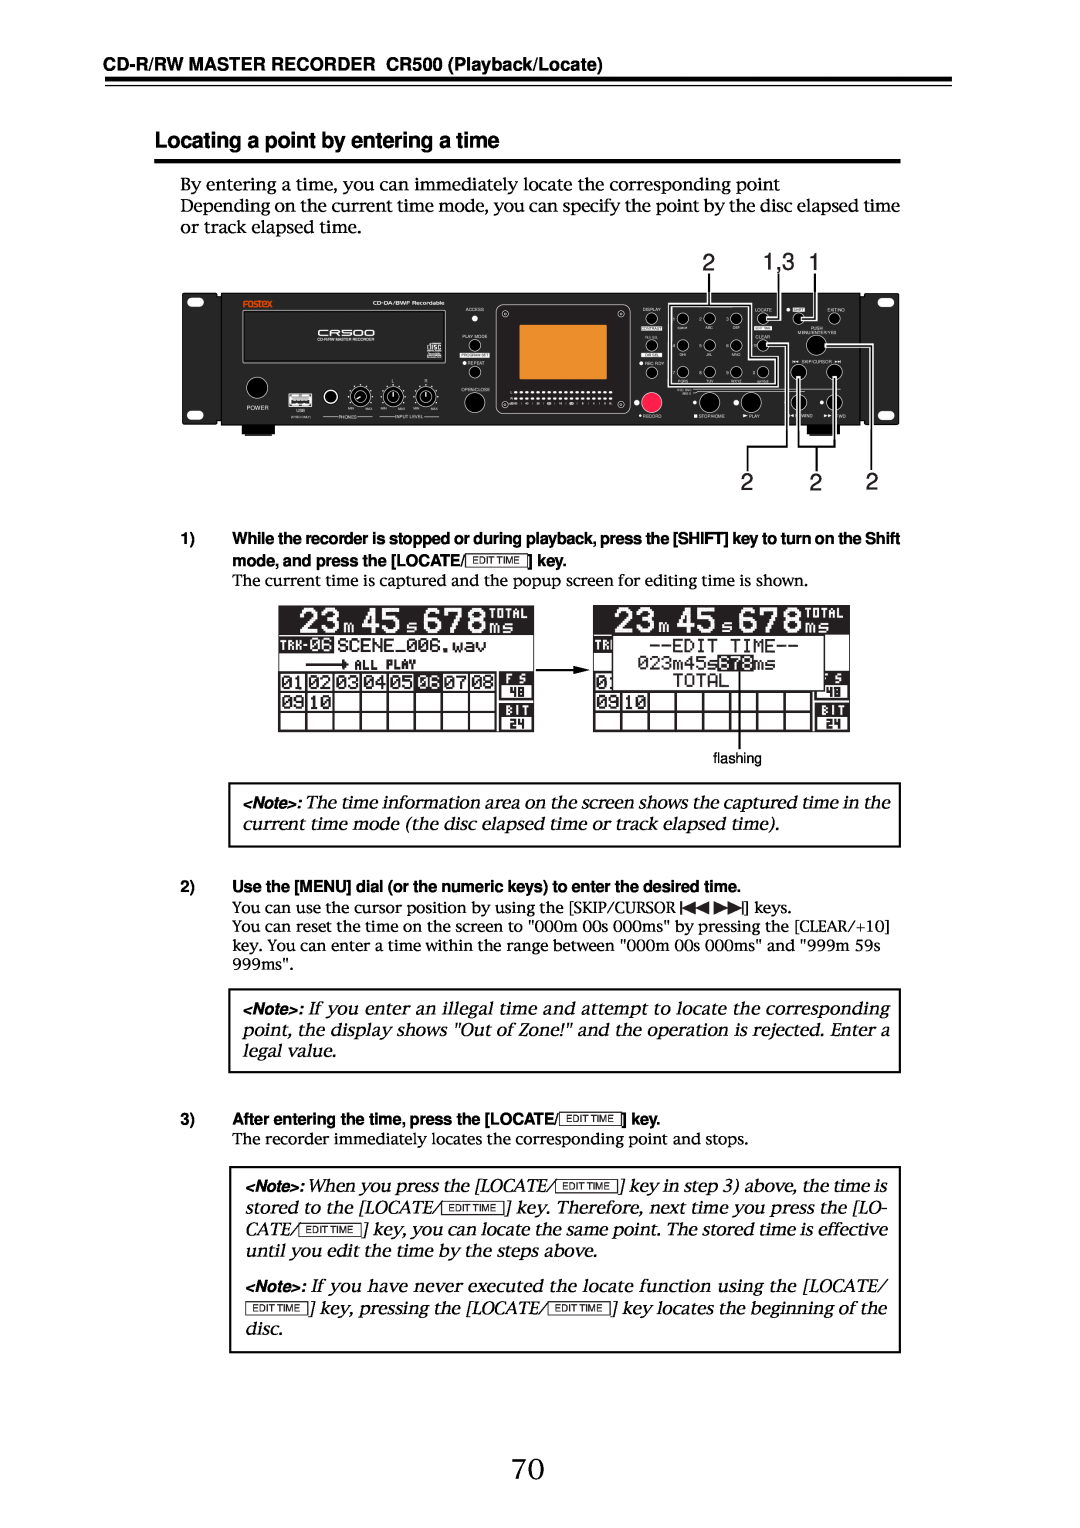 Fostex owner manual Locating a point by entering a time, CD-R/RWMASTER RECORDER CR500 Playback/Locate 